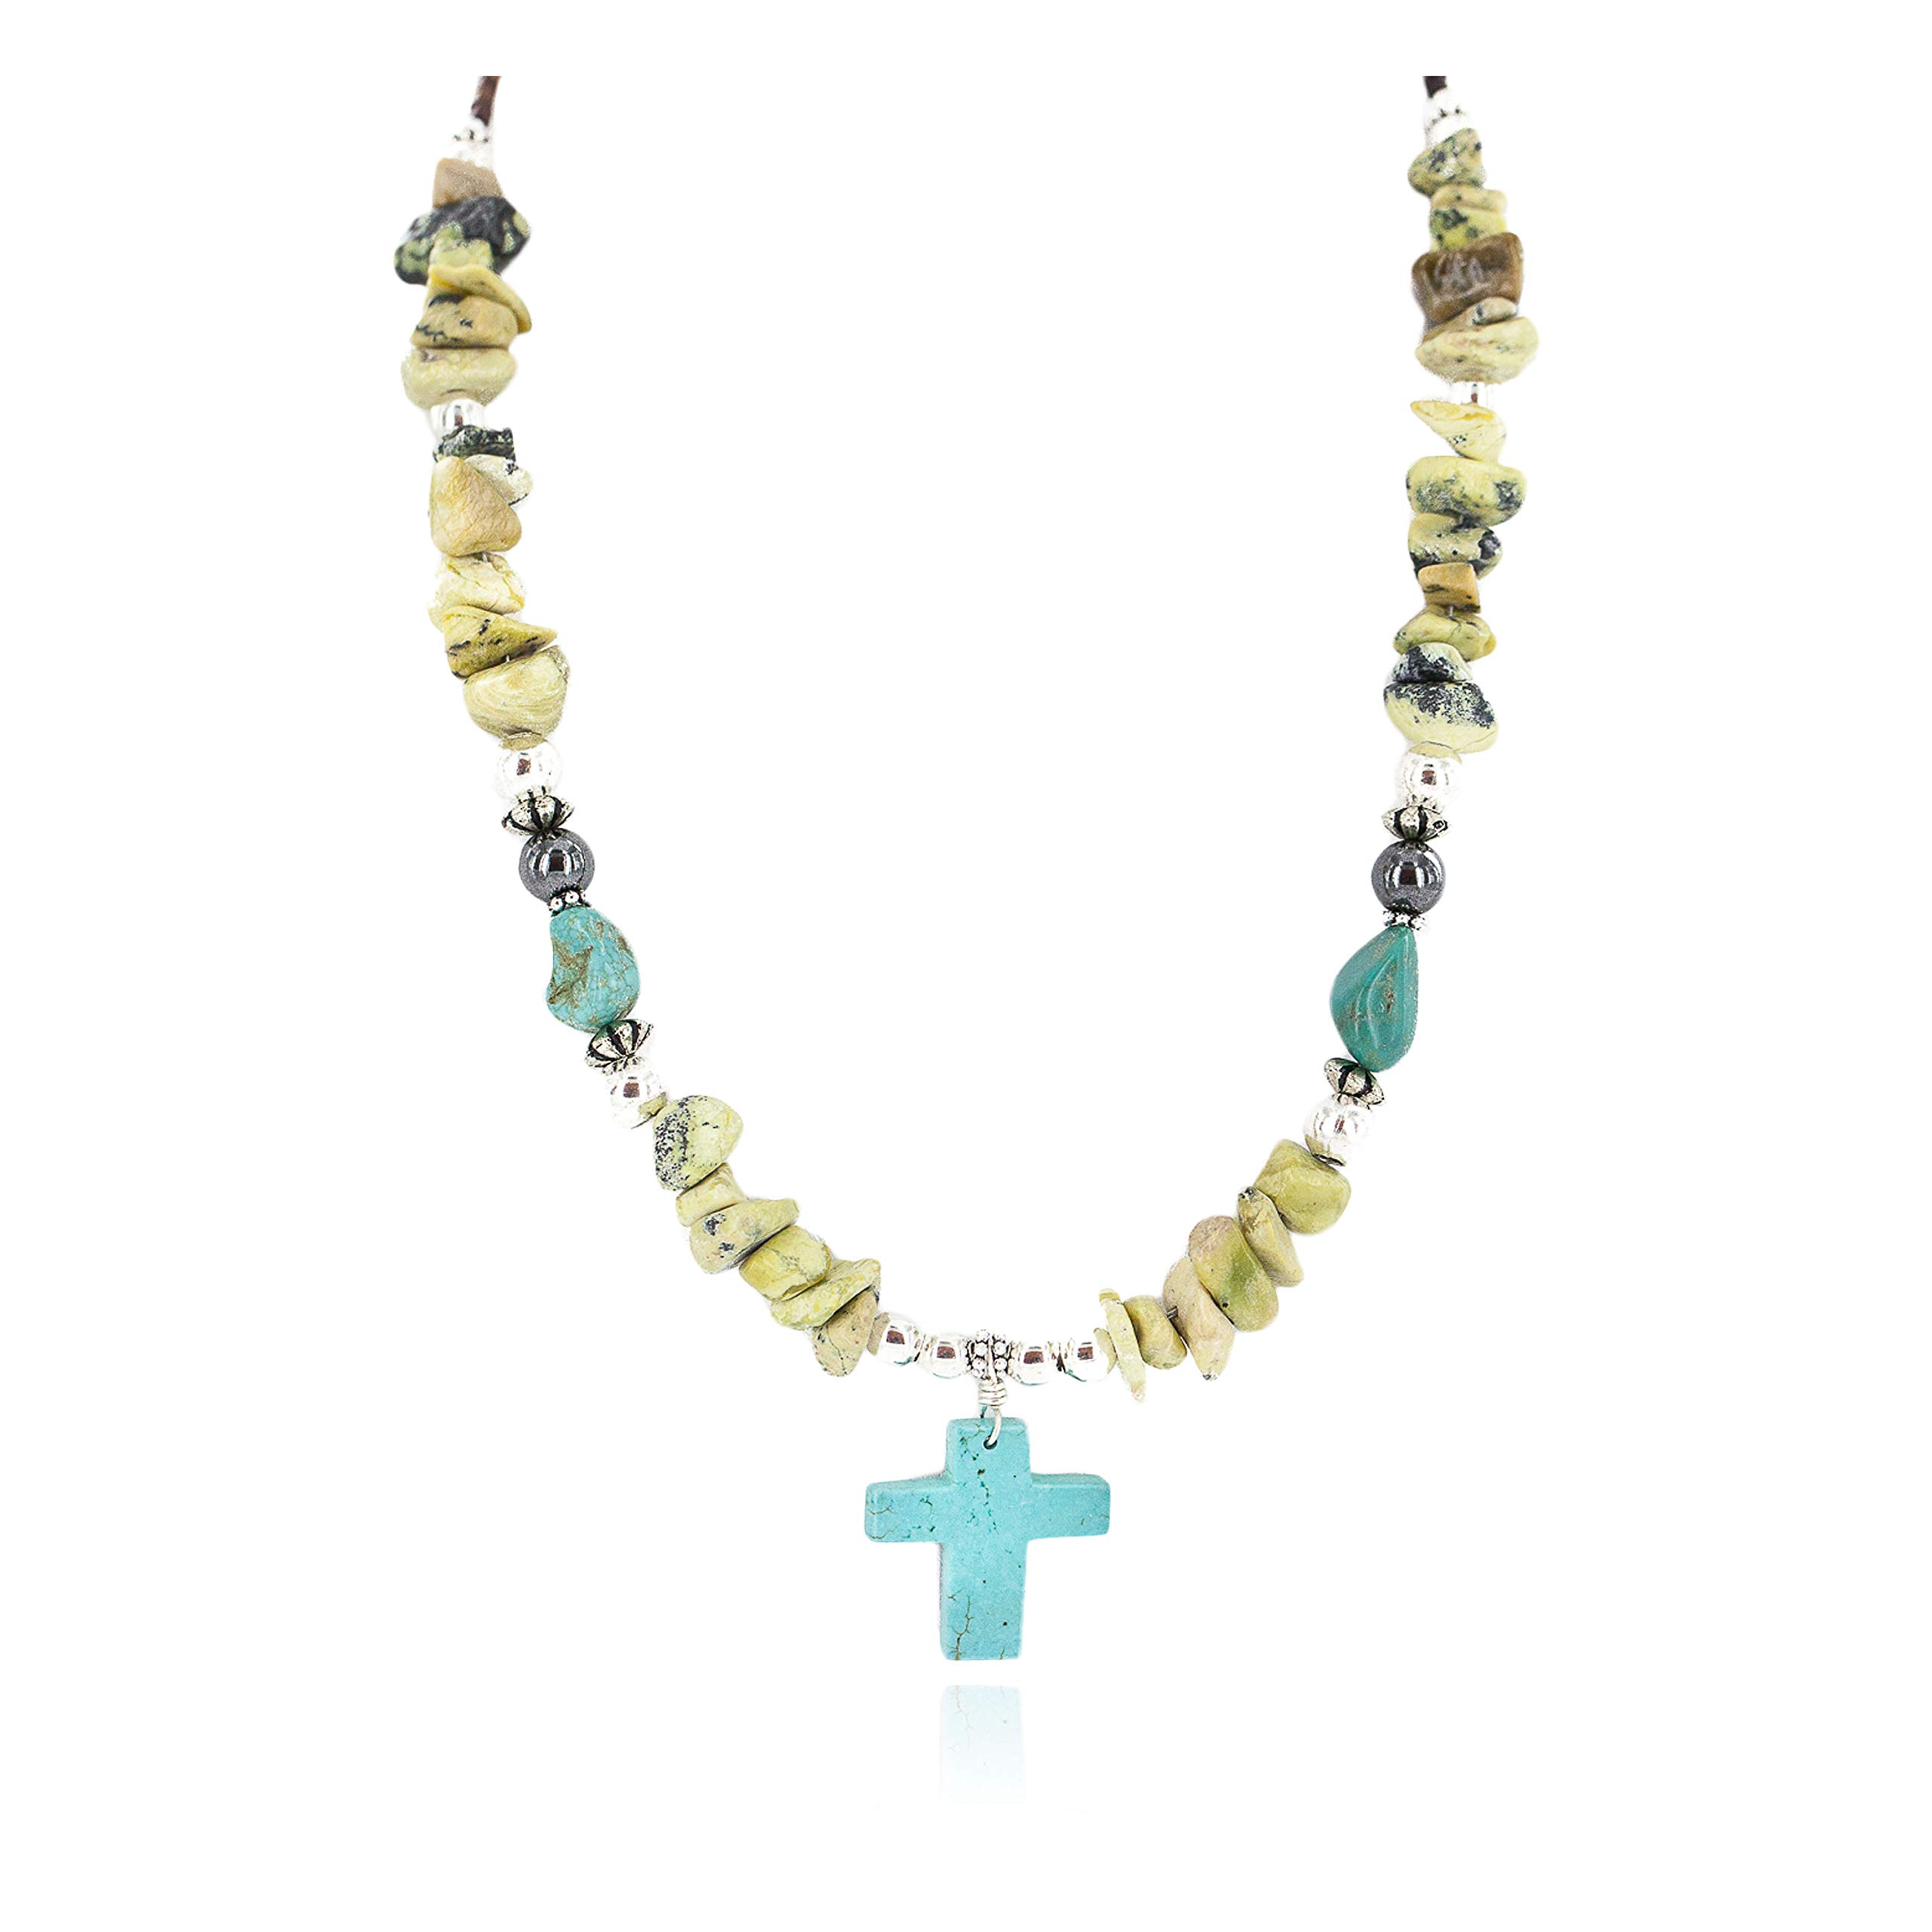 $260Tag Cross Silver Certified Navajo Turquoise Green Native Necklace 750241-3 Made by Loma Siiva